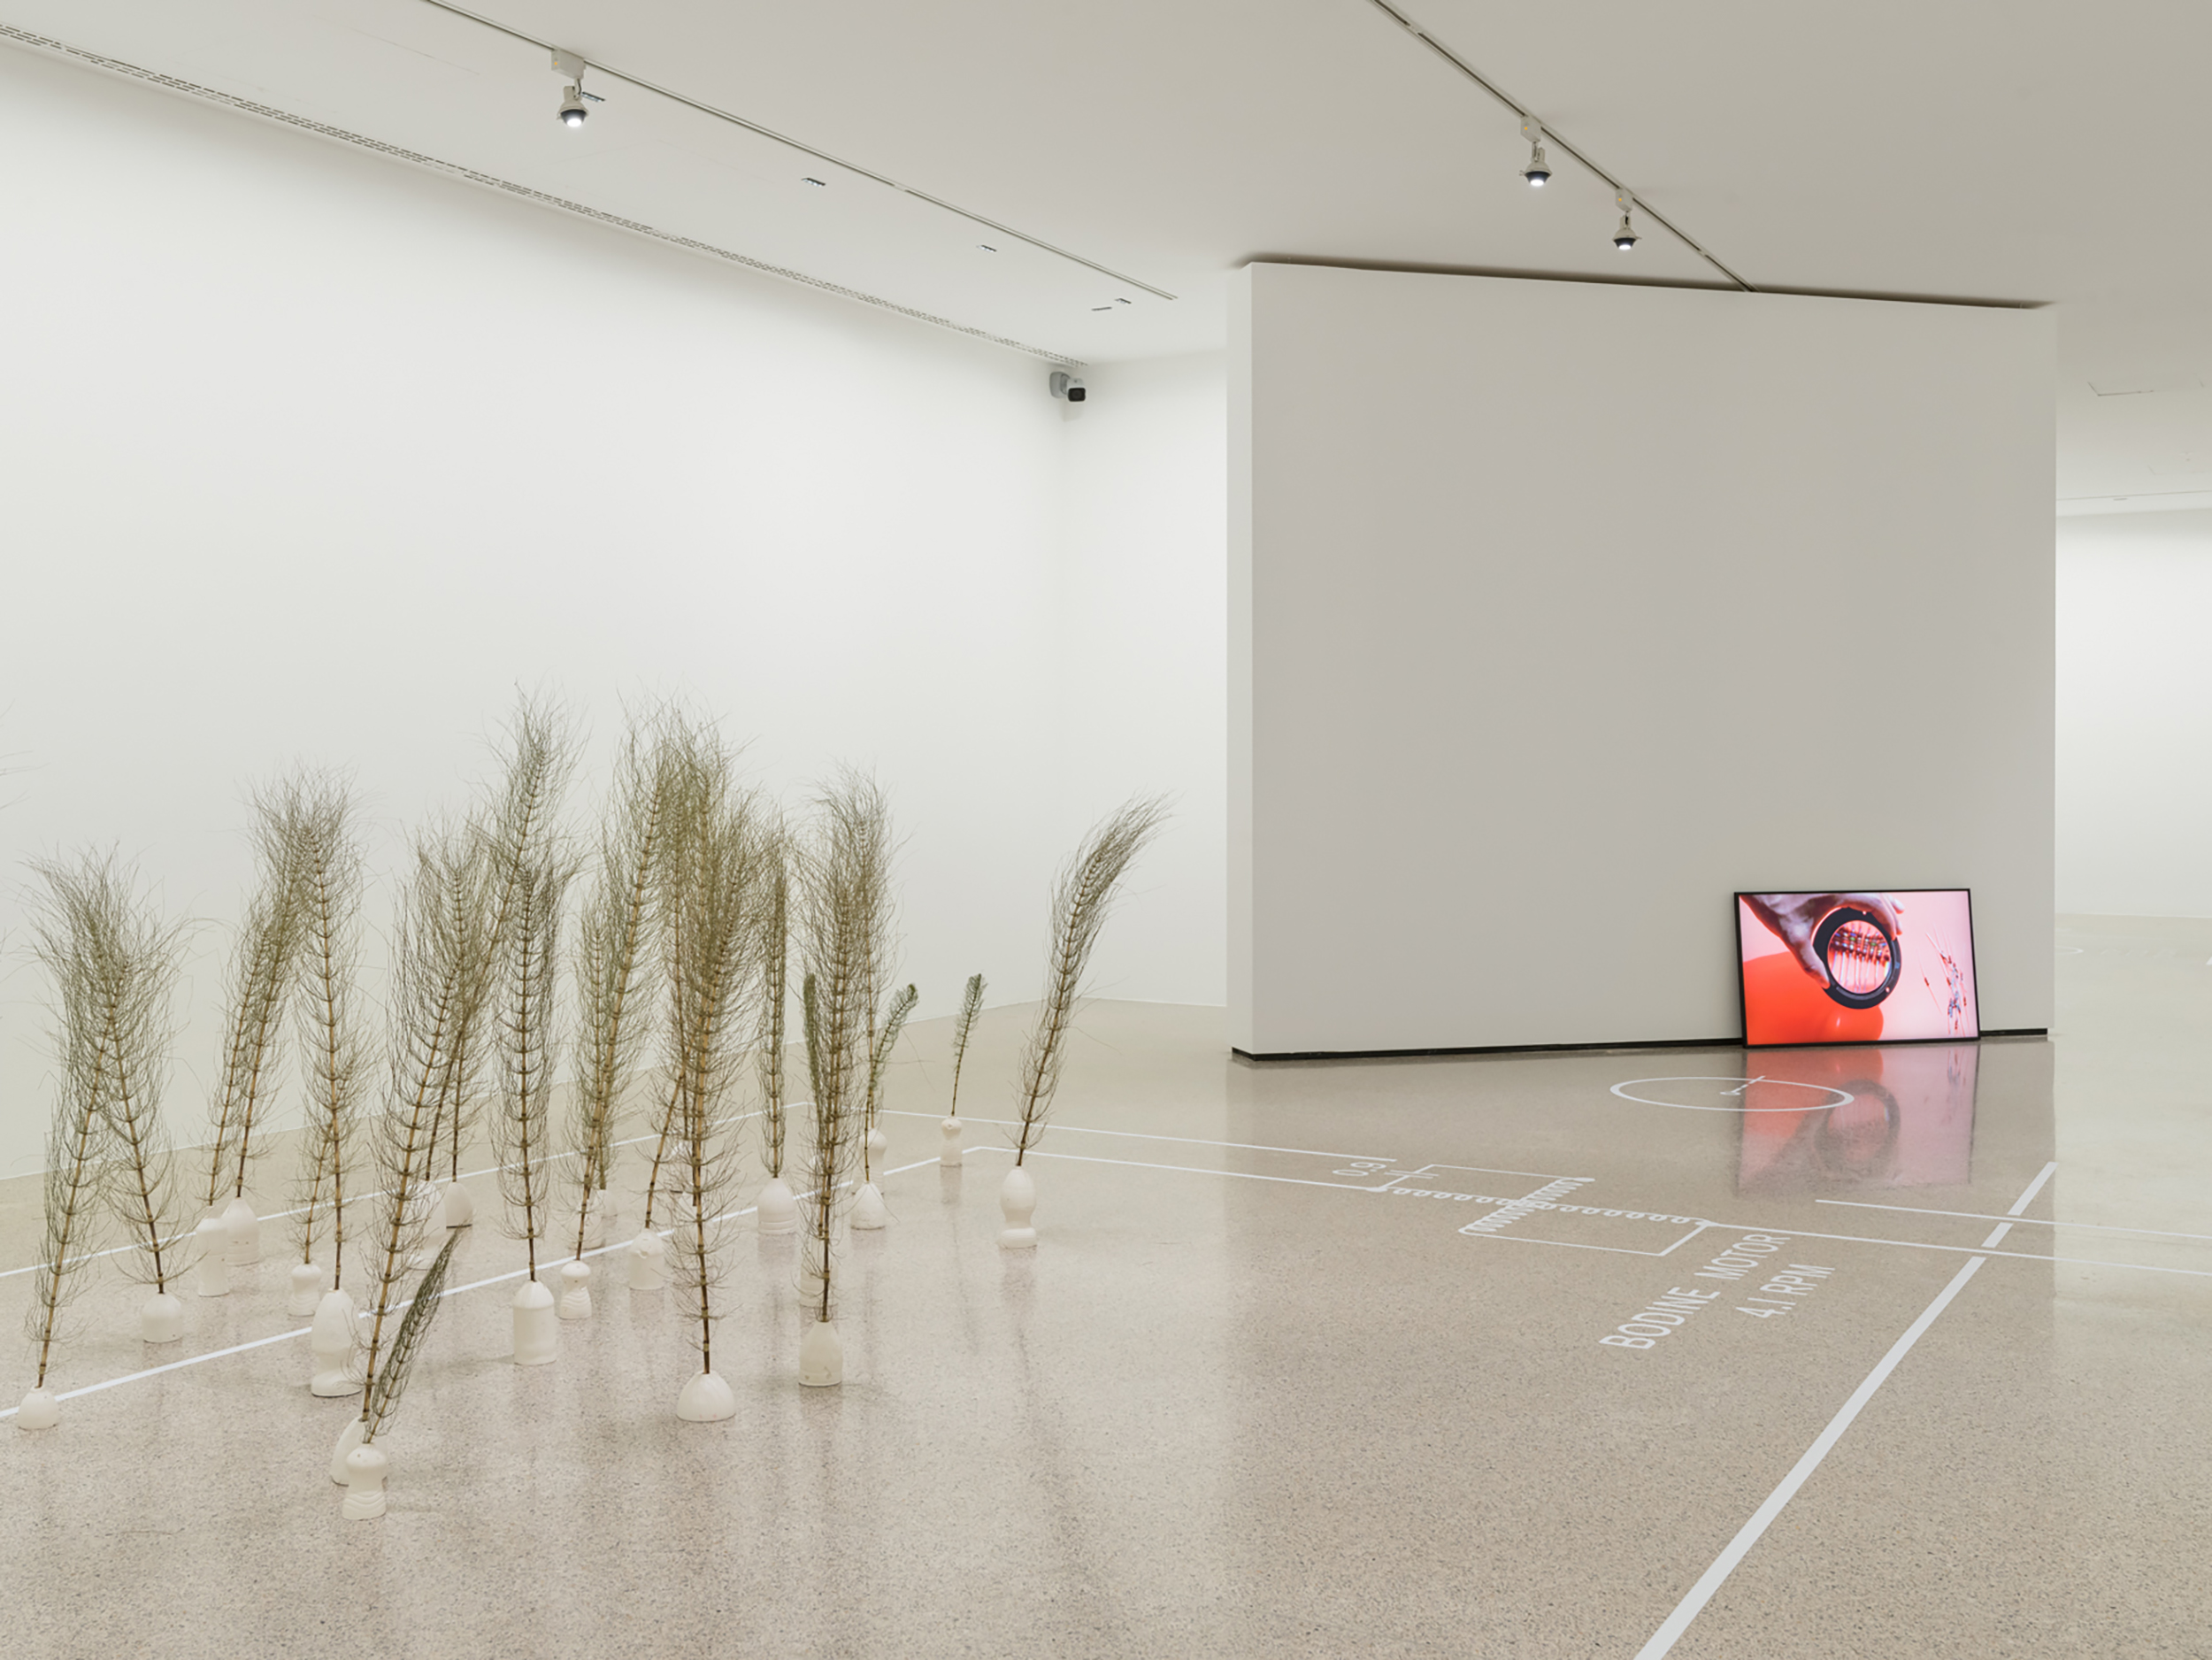 Dried grasses stand in the exhibition room, a screen with a red image can be seen in the background